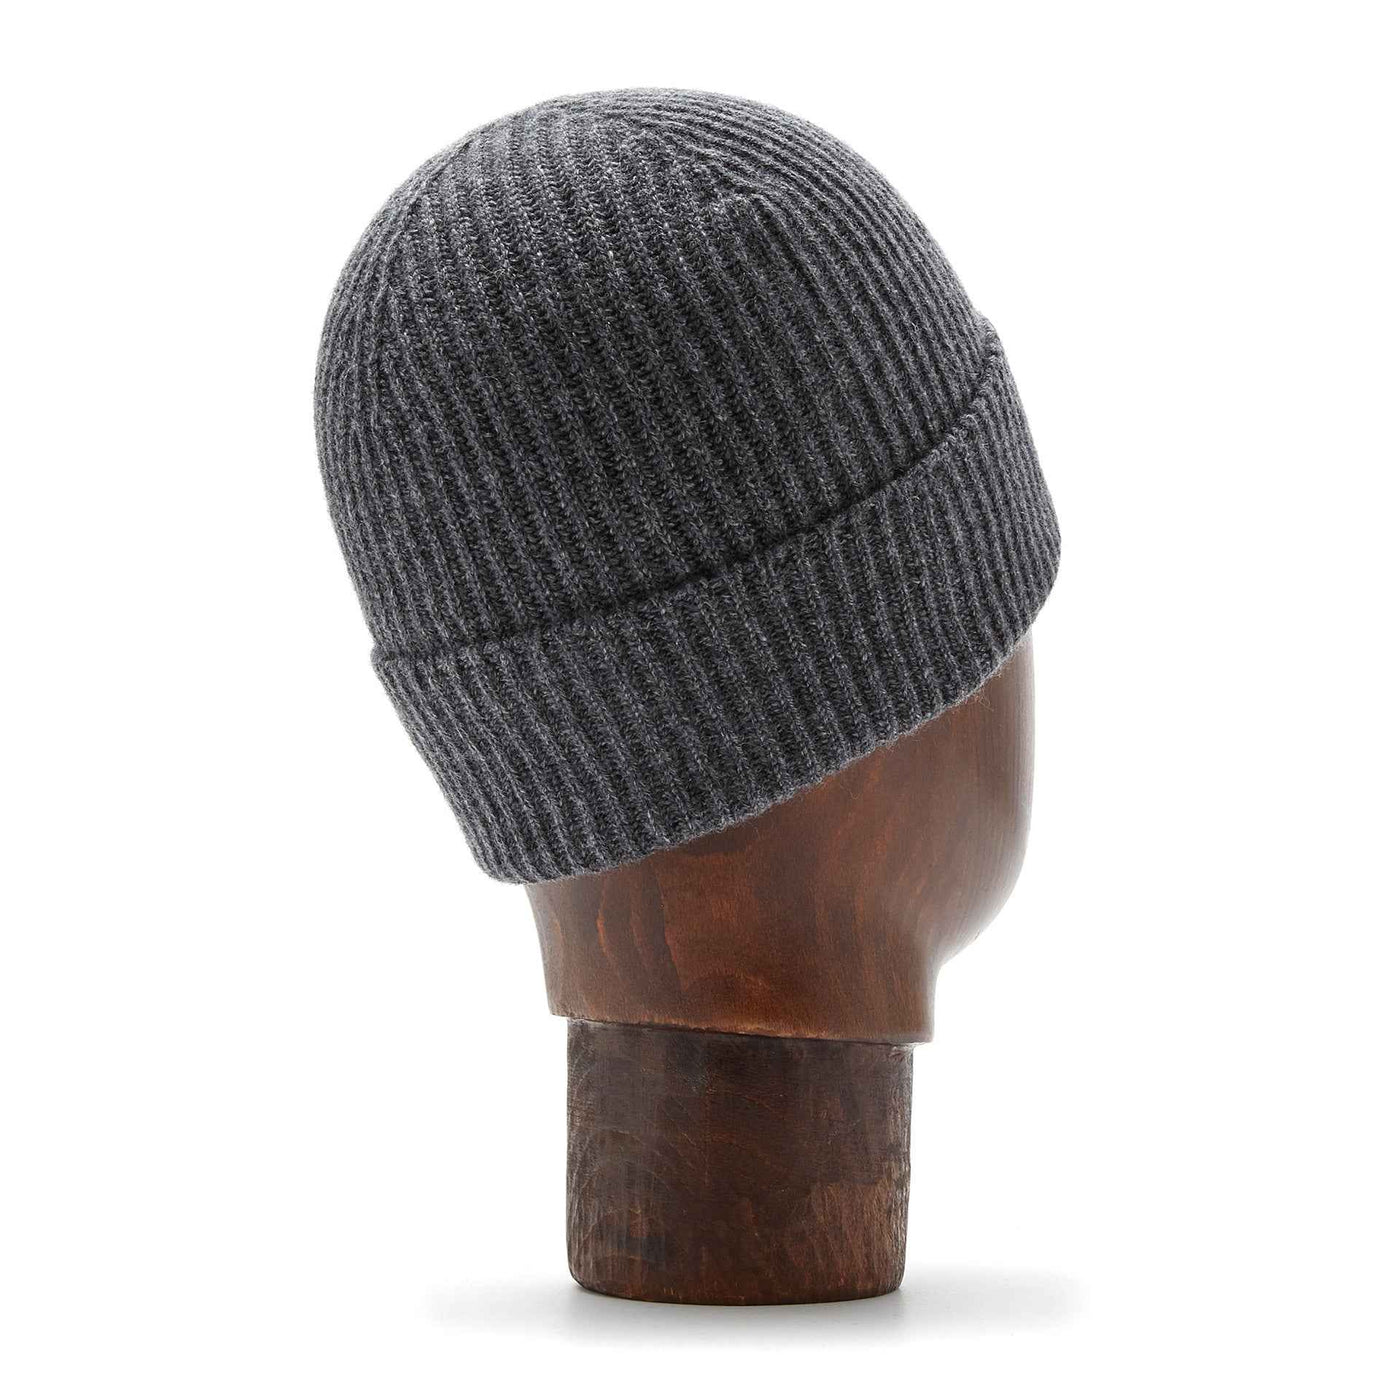 100% Cashmere Knitted Hat - Grey